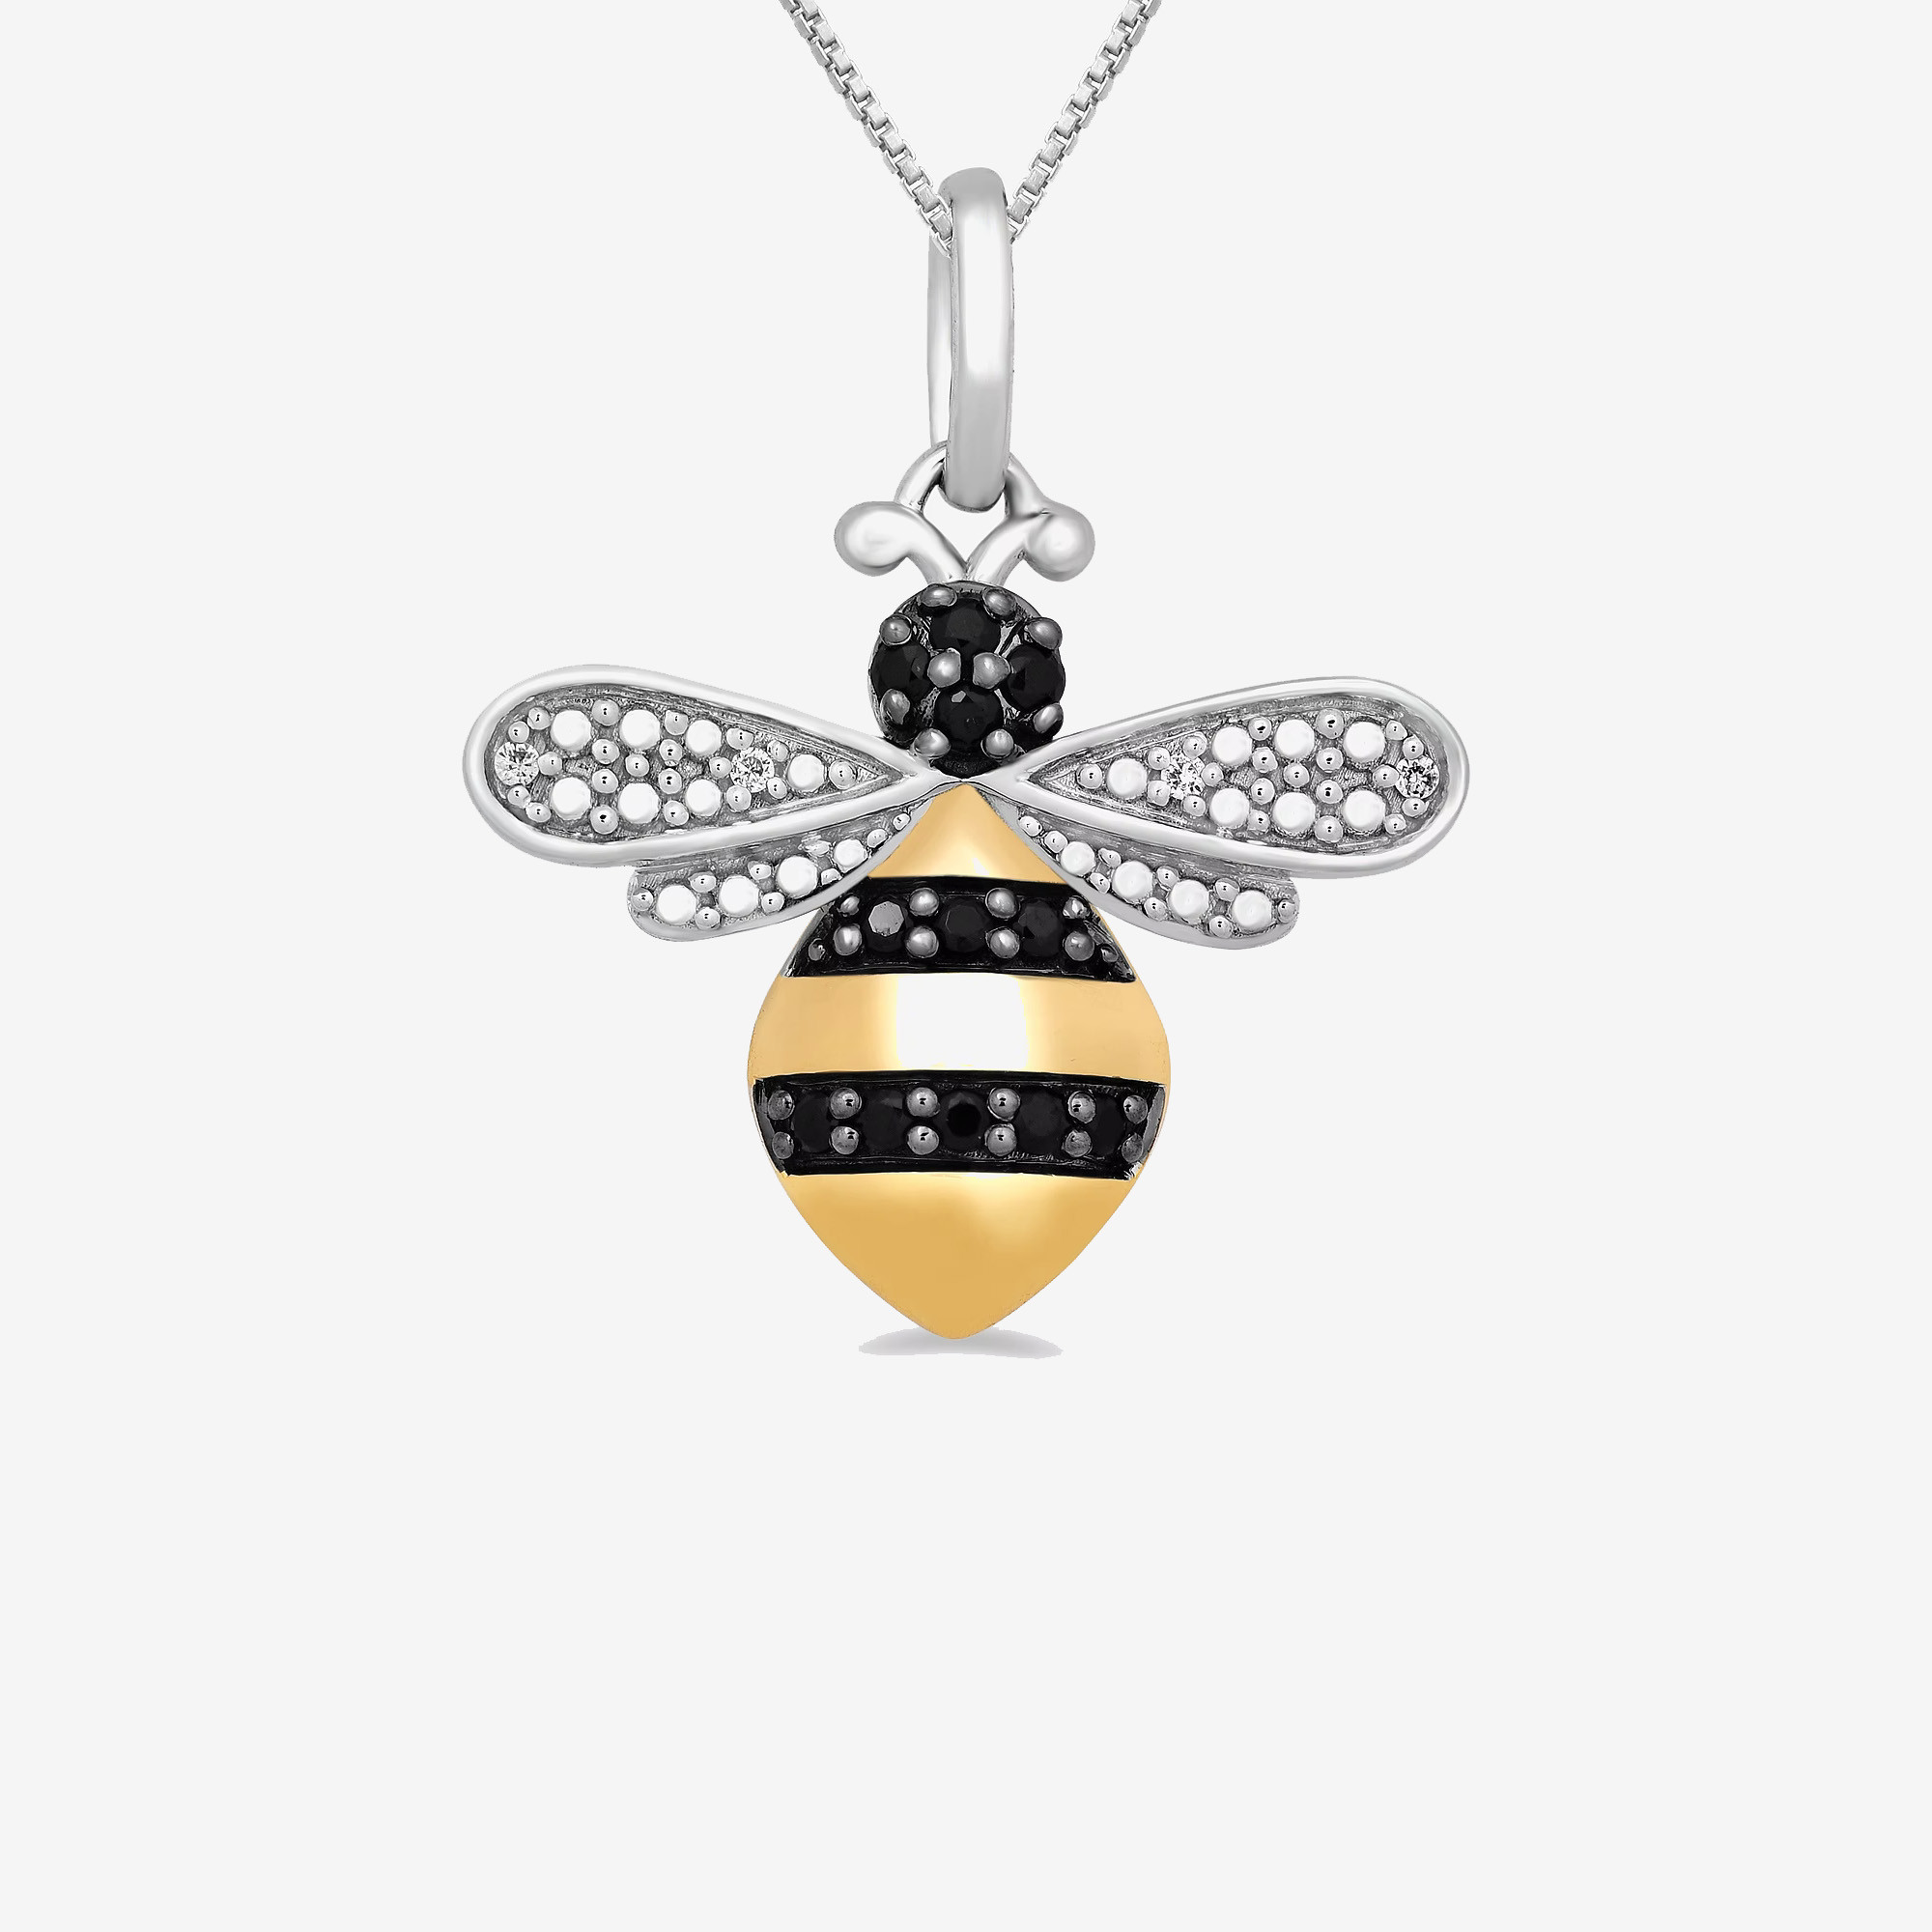 Ross-Simons Jade Bumble Bee Pendant Necklace in Sterling Silver, Women's,  Adult - Walmart.com